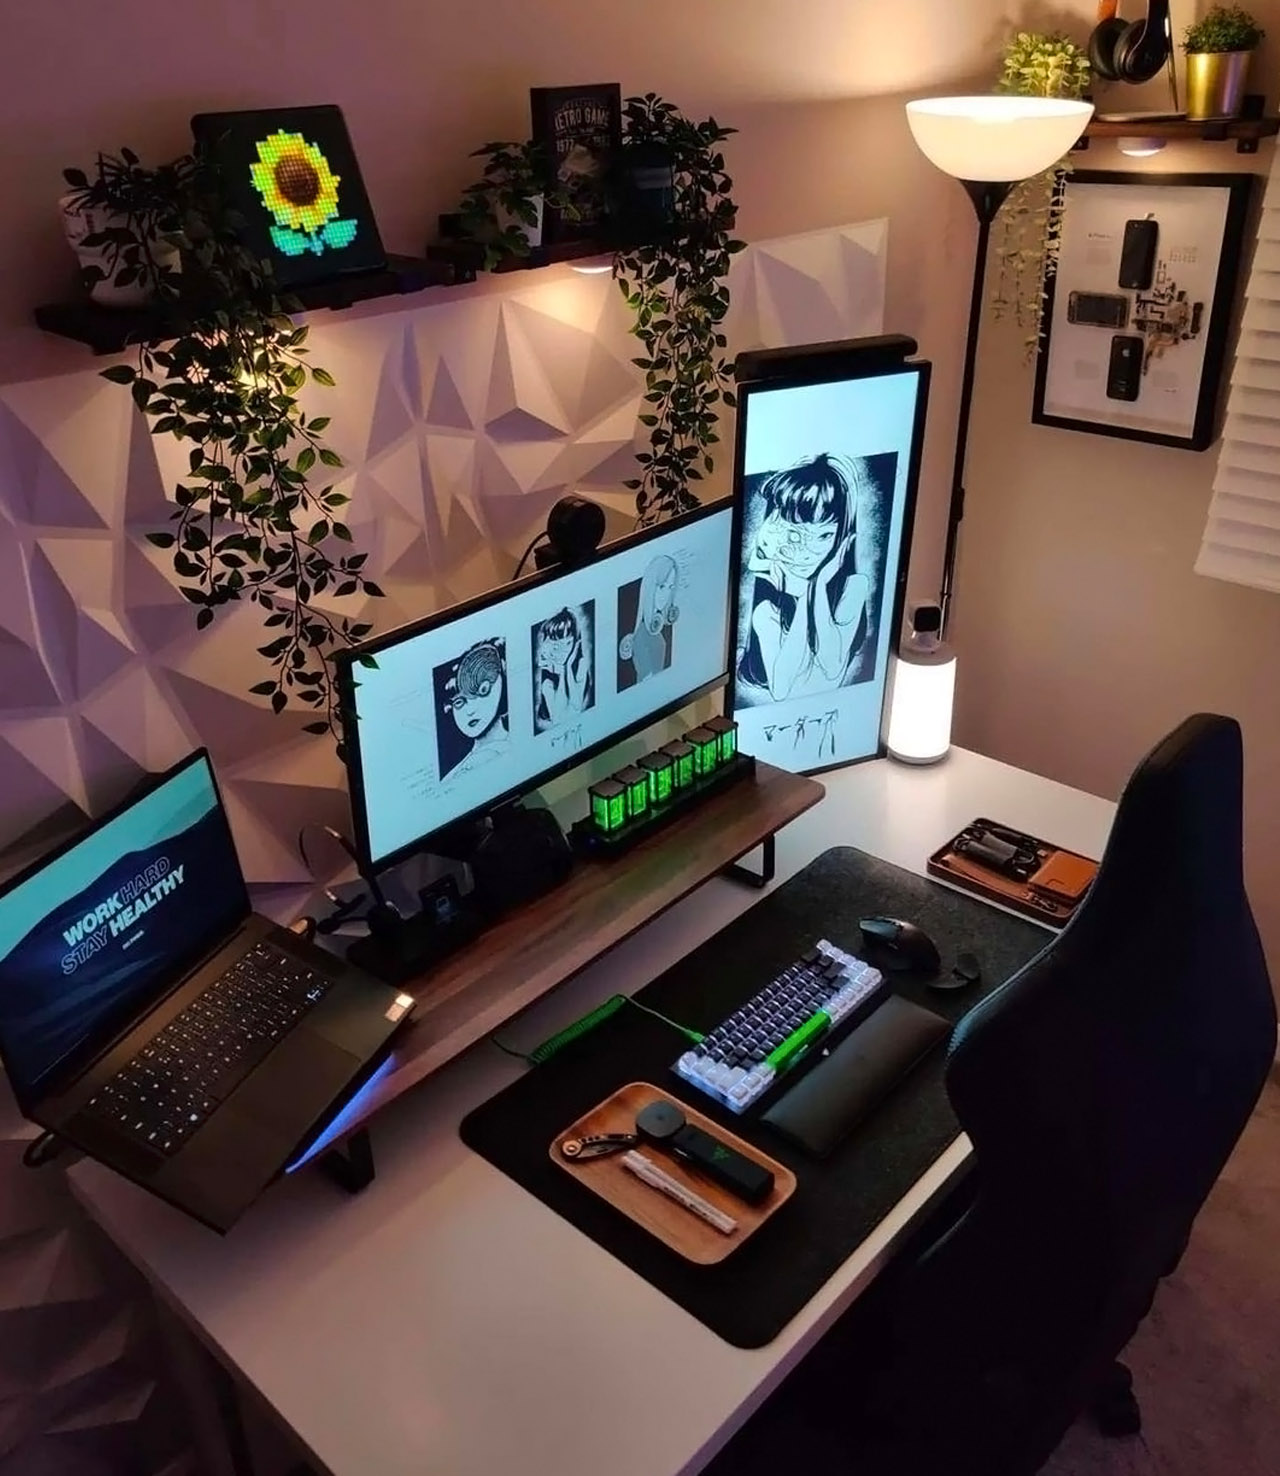 My9to5 WFH Setup Goals 👩🏻‍💻👌, Gallery posted by QY